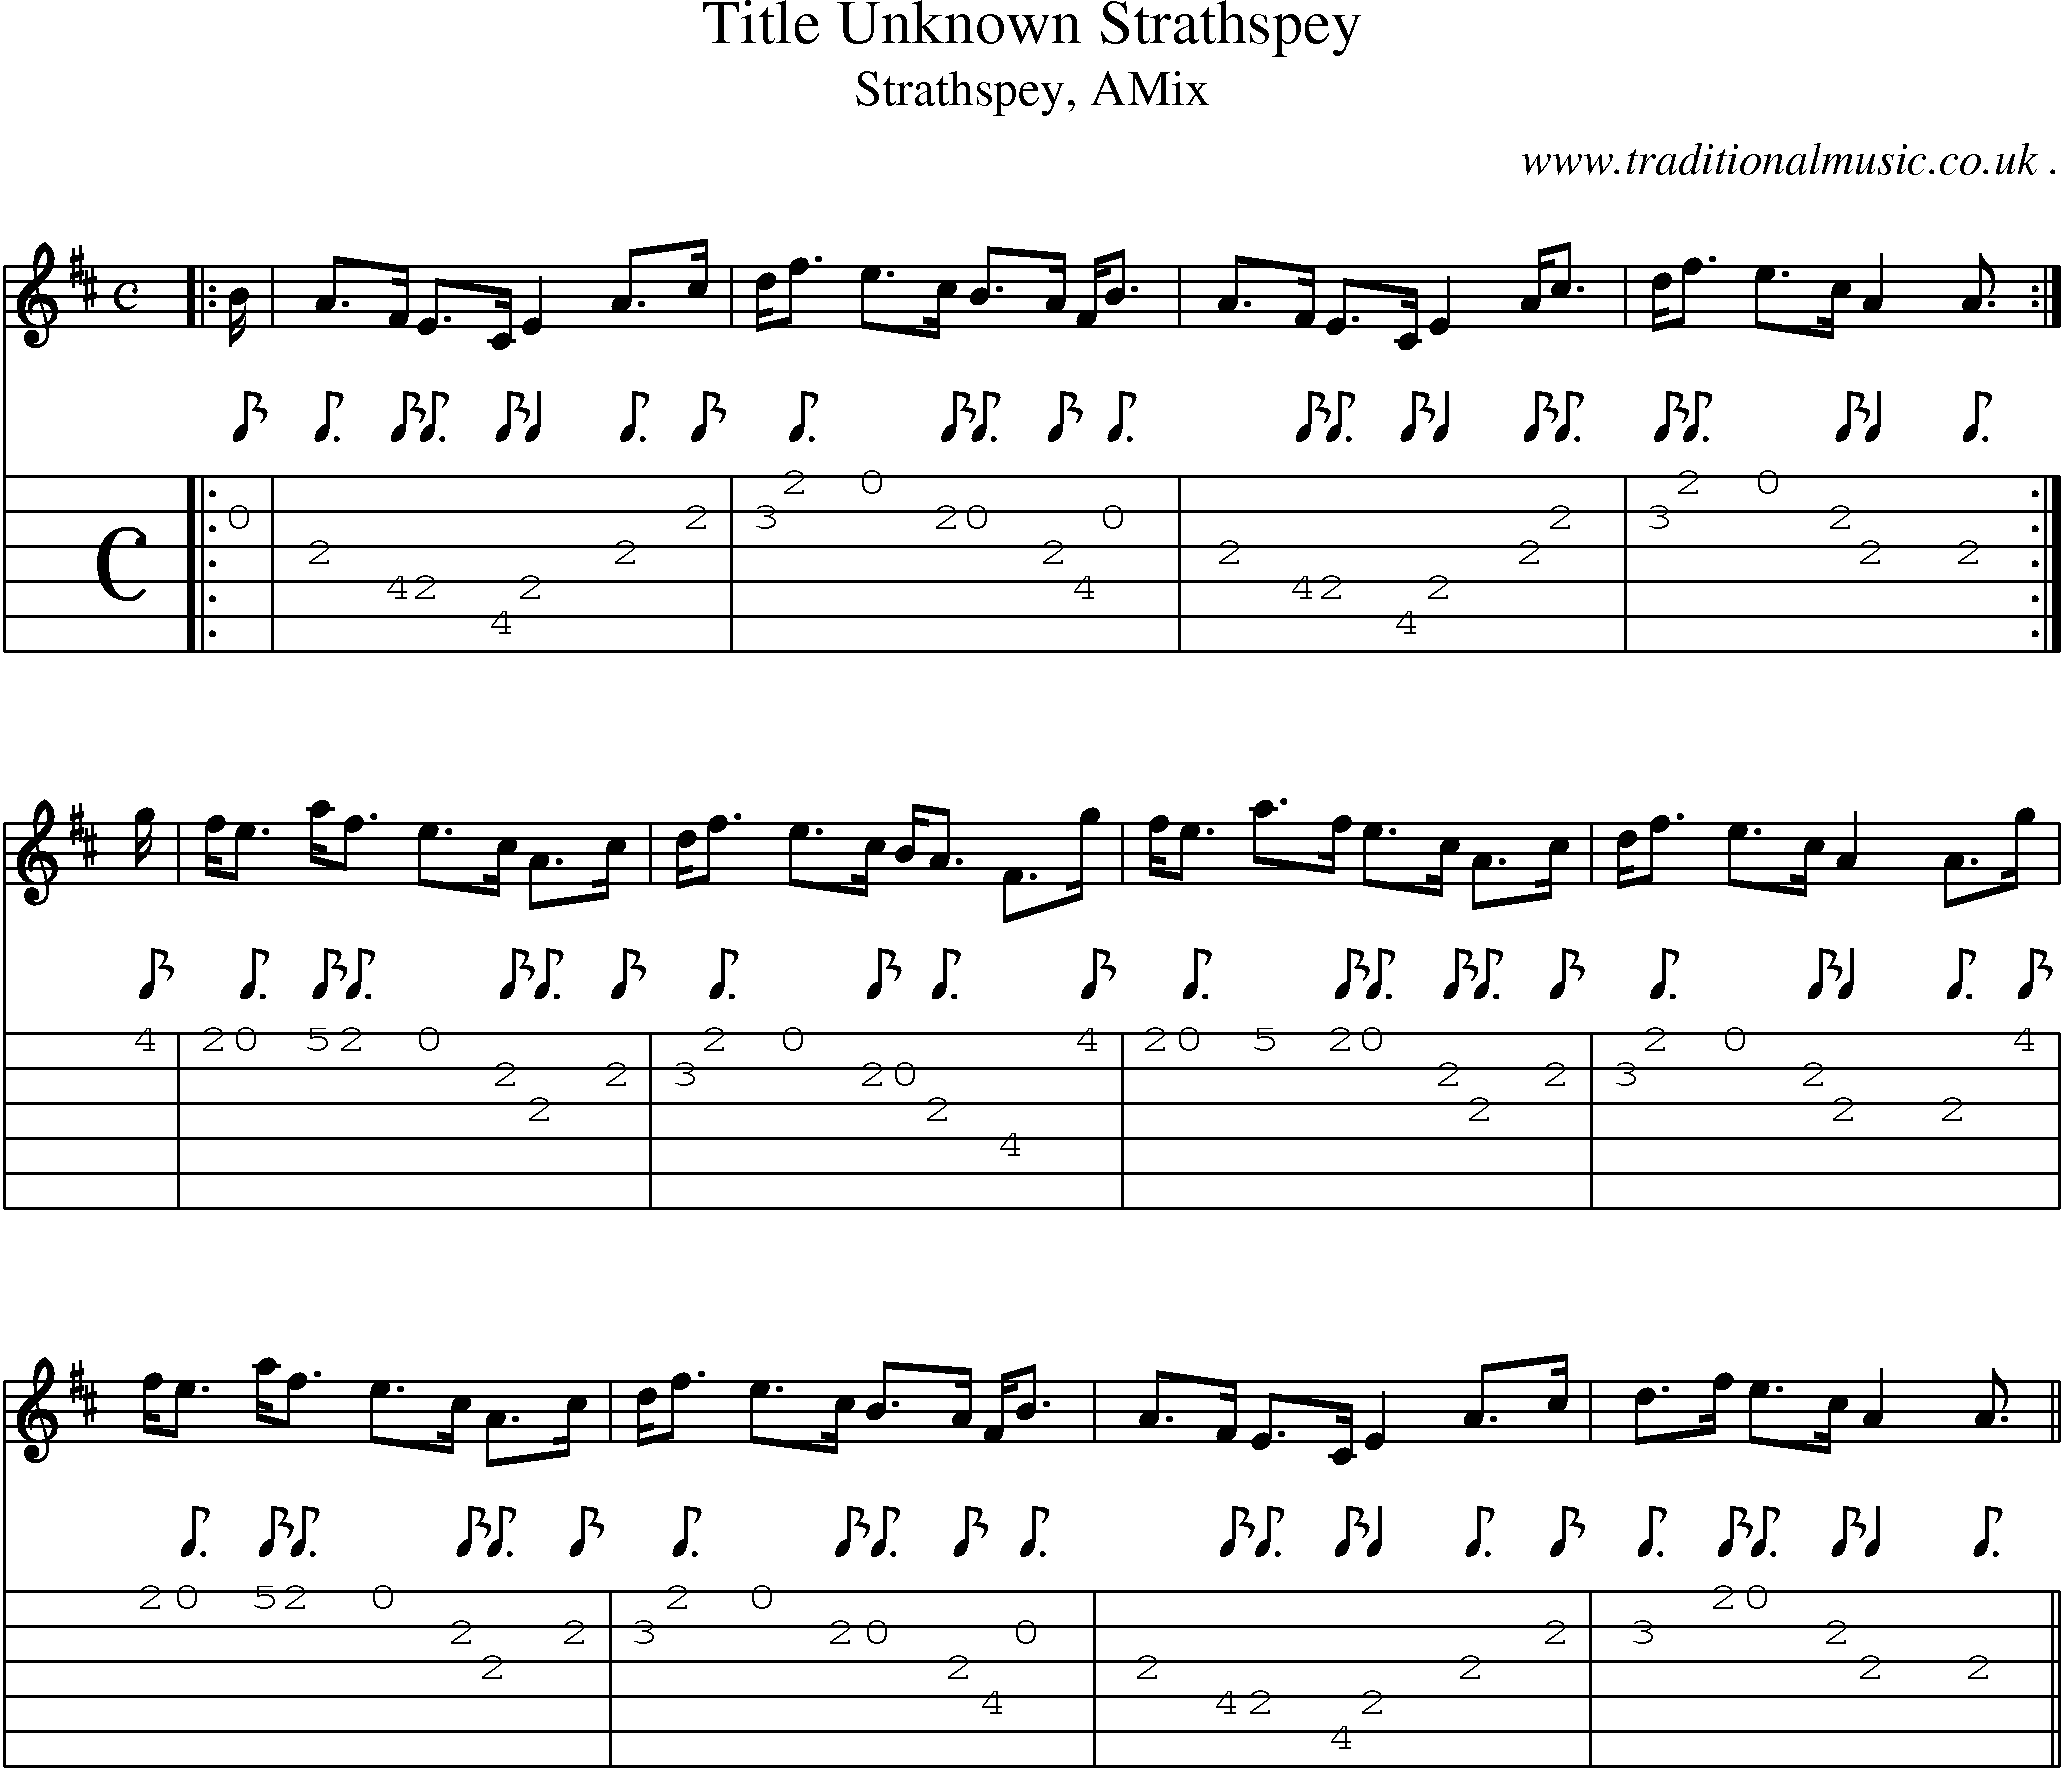 Sheet-music  score, Chords and Guitar Tabs for Title Unknown Strathspey